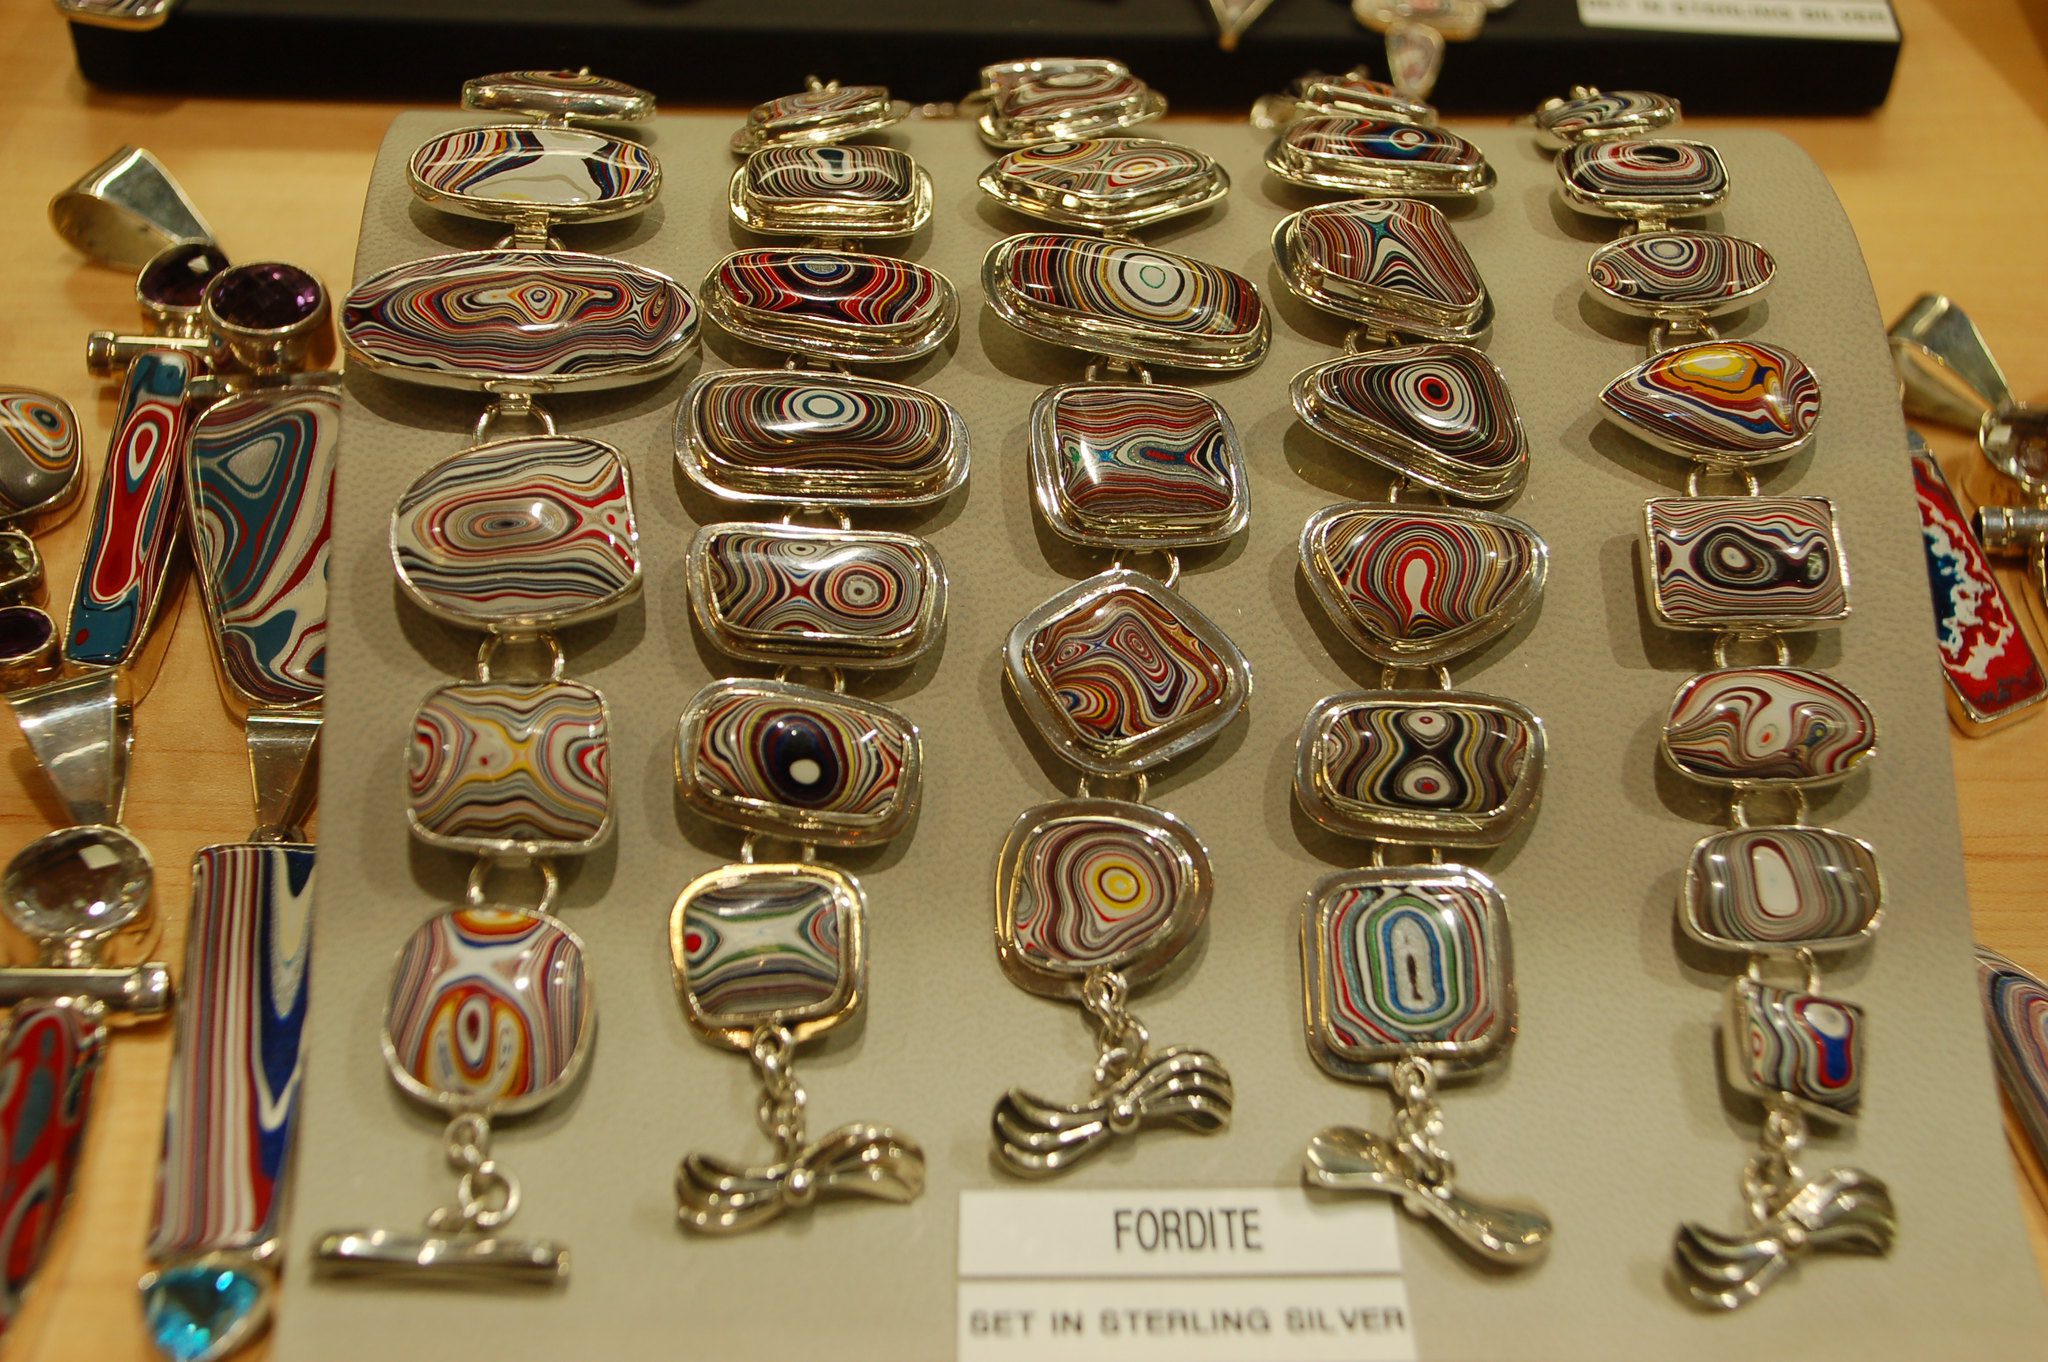 Different types of fordite.